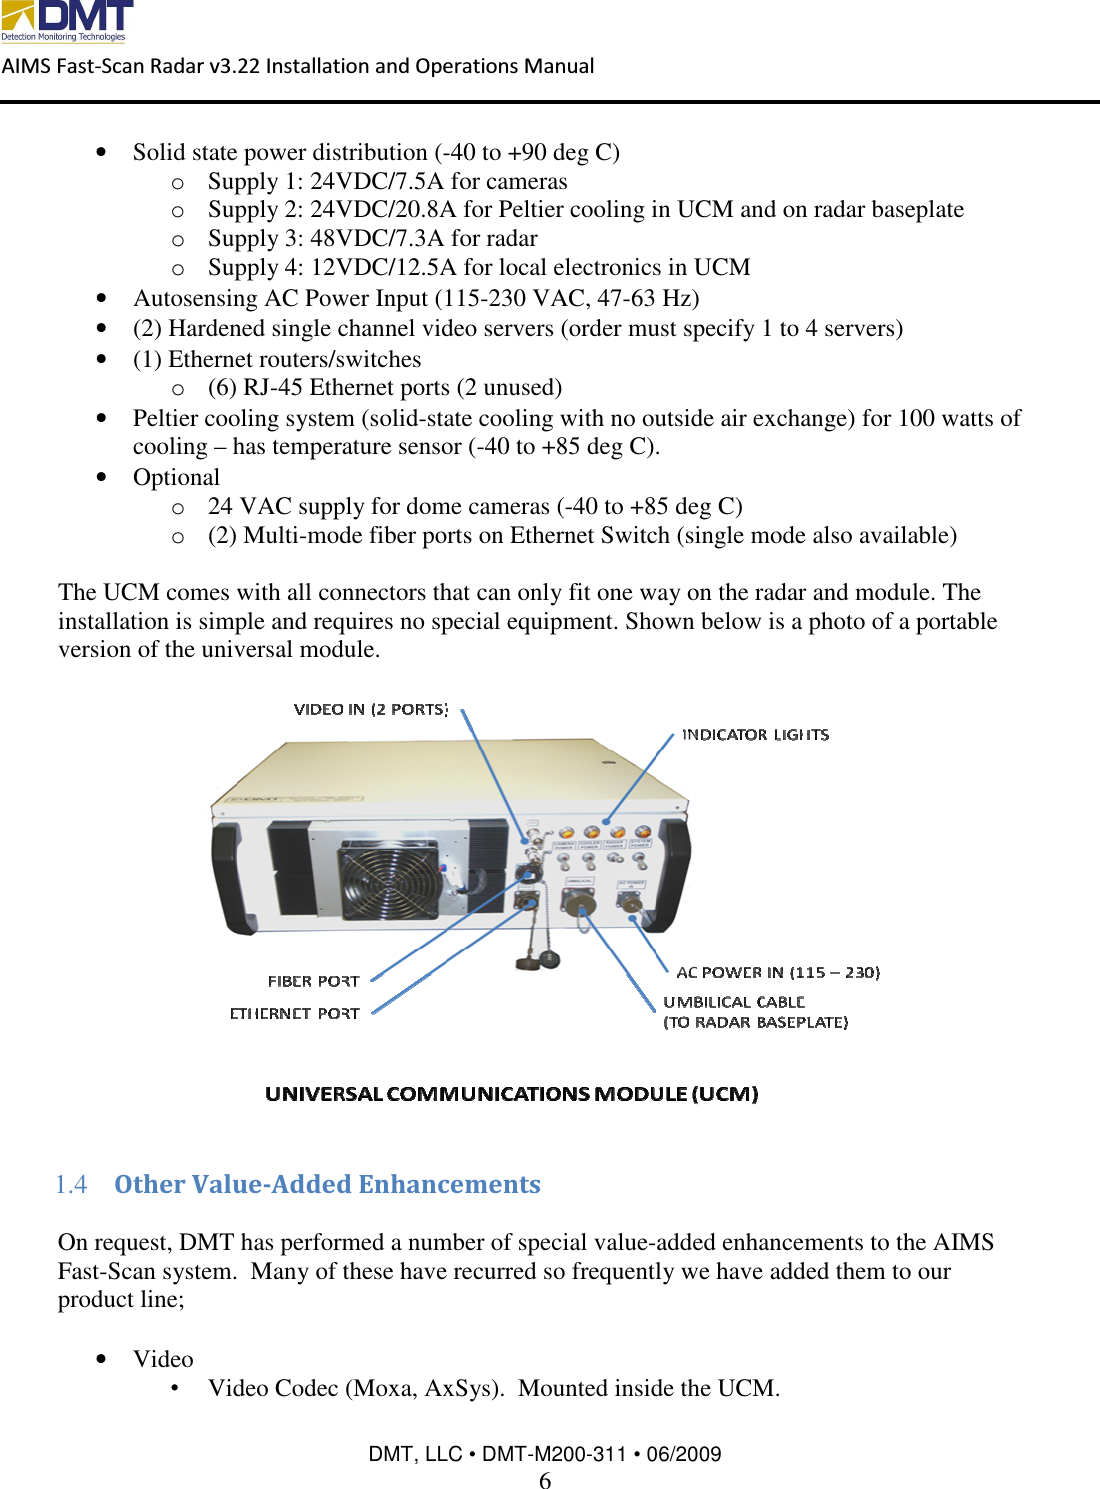  AIMS Fast-Scan Radar v3.22 Installation and Operations Manual    DMT, LLC • DMT-M200-311 • 06/2009 6  • Solid state power distribution (-40 to +90 deg C) o Supply 1: 24VDC/7.5A for cameras  o Supply 2: 24VDC/20.8A for Peltier cooling in UCM and on radar baseplate o Supply 3: 48VDC/7.3A for radar  o Supply 4: 12VDC/12.5A for local electronics in UCM • Autosensing AC Power Input (115-230 VAC, 47-63 Hz) • (2) Hardened single channel video servers (order must specify 1 to 4 servers) • (1) Ethernet routers/switches o (6) RJ-45 Ethernet ports (2 unused) • Peltier cooling system (solid-state cooling with no outside air exchange) for 100 watts of cooling – has temperature sensor (-40 to +85 deg C). • Optional o 24 VAC supply for dome cameras (-40 to +85 deg C) o (2) Multi-mode fiber ports on Ethernet Switch (single mode also available)  The UCM comes with all connectors that can only fit one way on the radar and module. The installation is simple and requires no special equipment. Shown below is a photo of a portable version of the universal module.    1.4 Other Value-Added Enhancements  On request, DMT has performed a number of special value-added enhancements to the AIMS Fast-Scan system.  Many of these have recurred so frequently we have added them to our product line;  • Video •  Video Codec (Moxa, AxSys).  Mounted inside the UCM. 